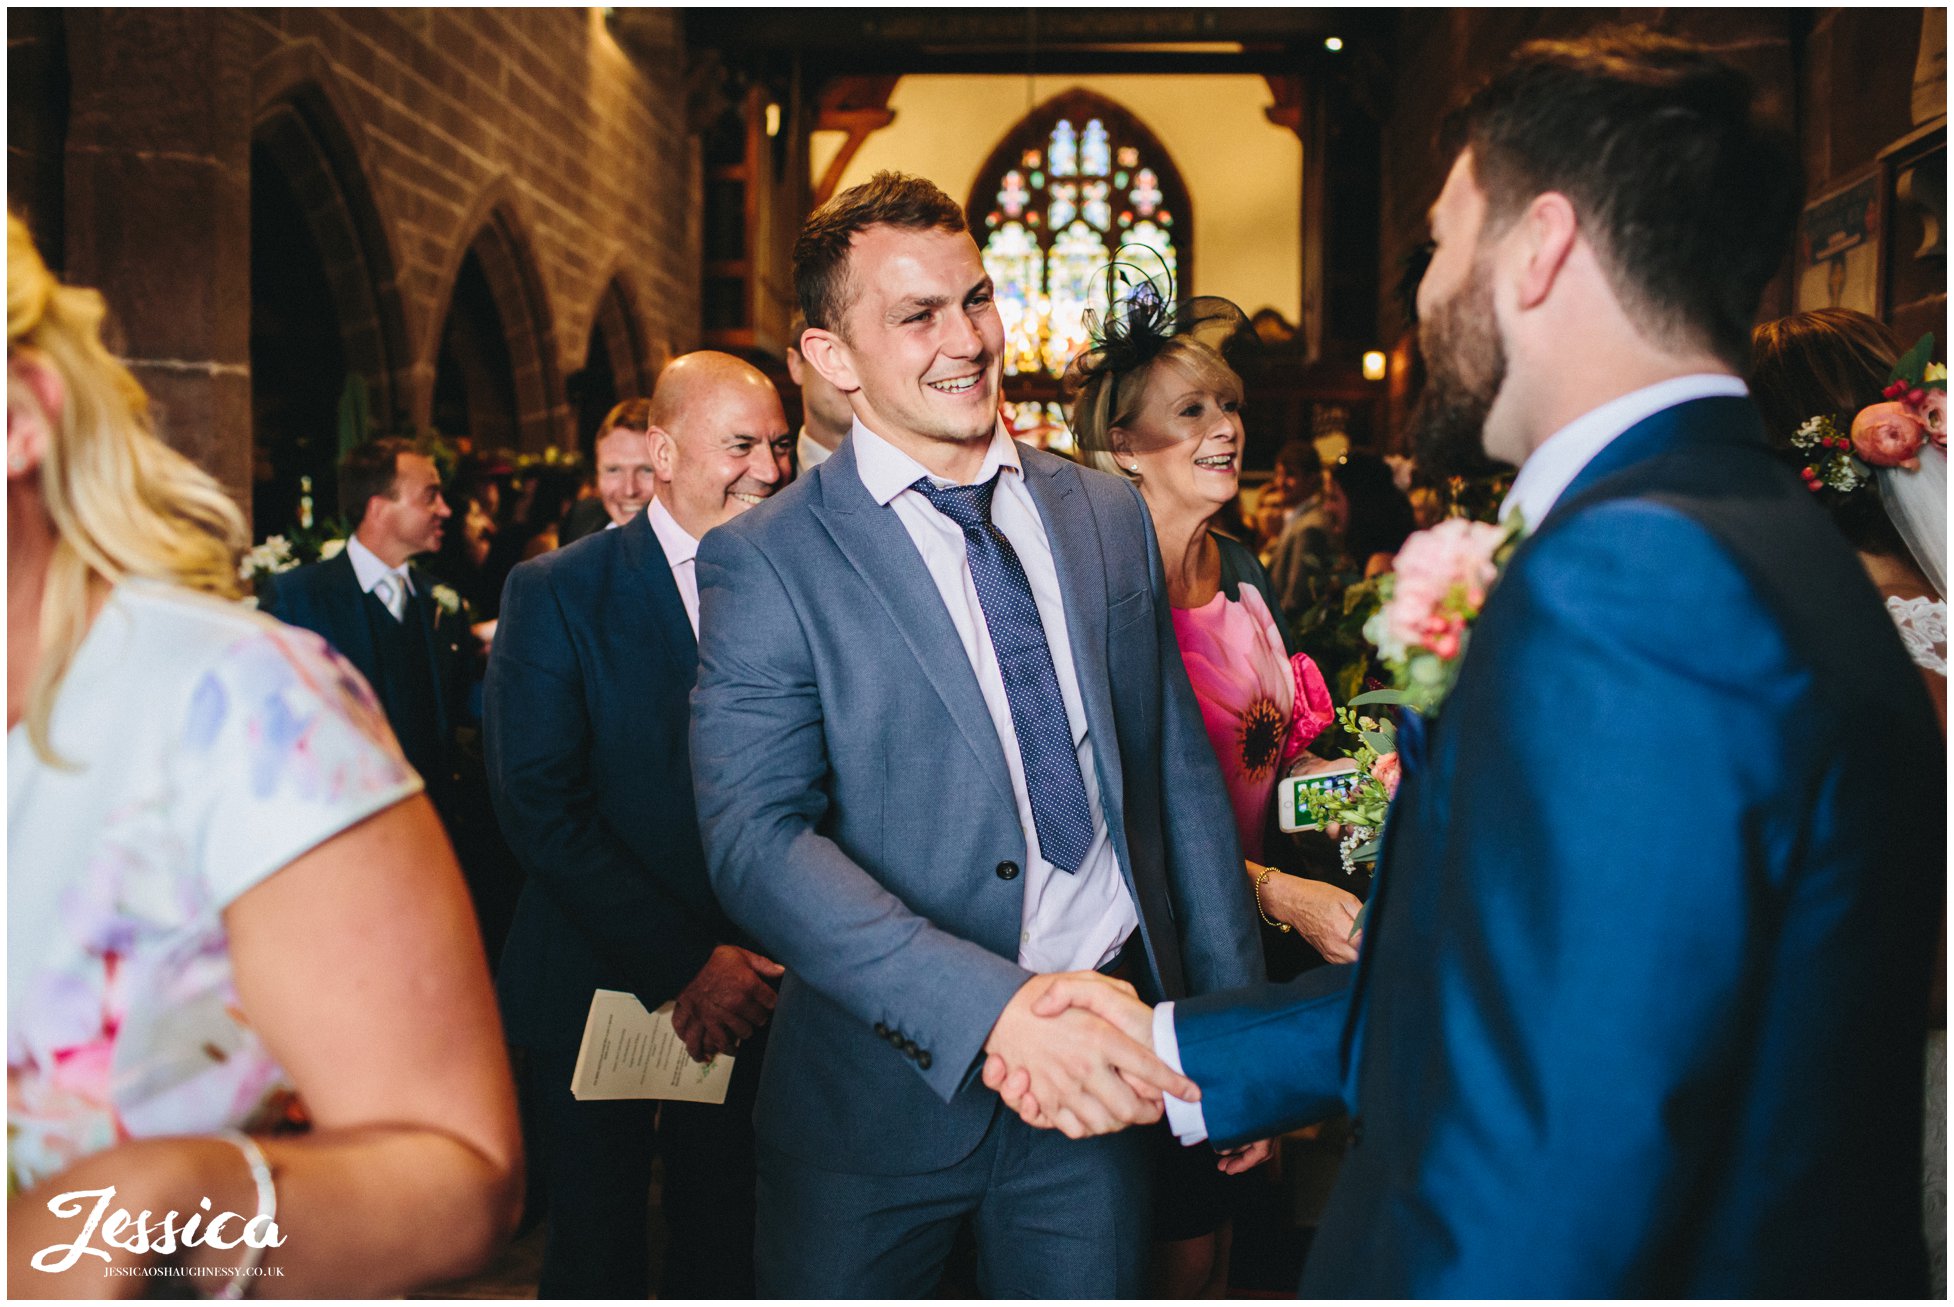 guest shakes grooms hands after wedding ceremony